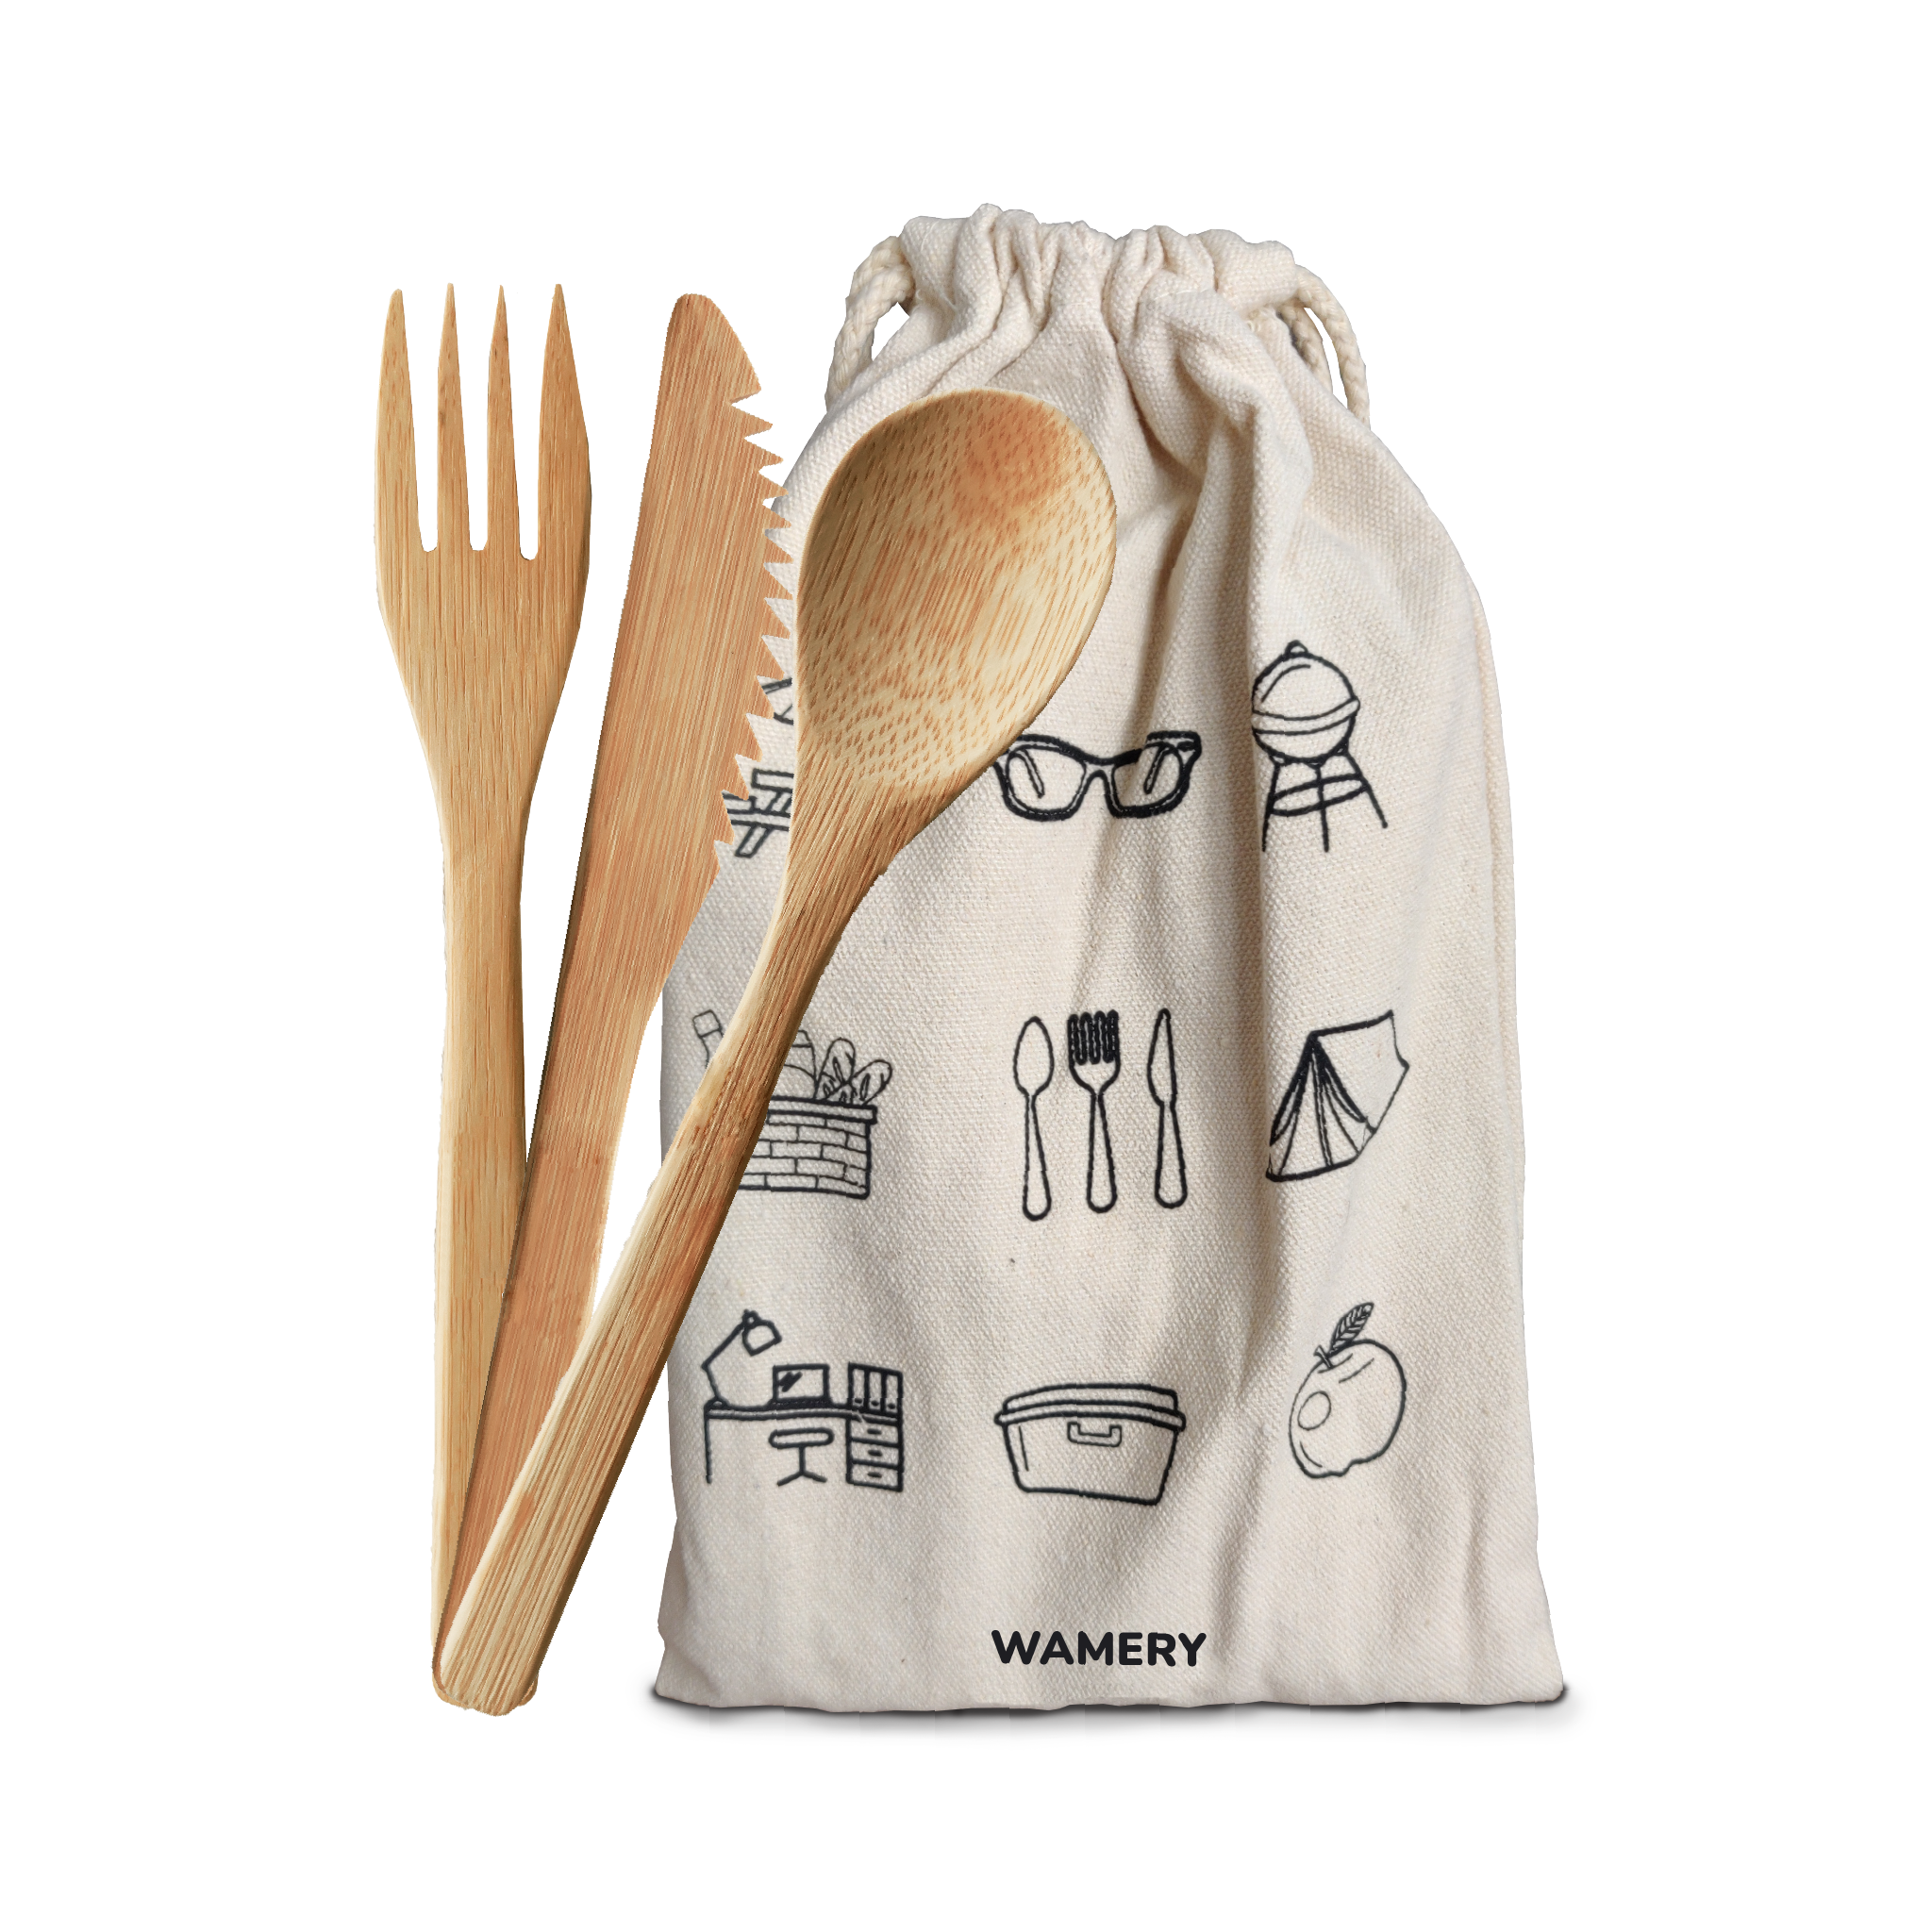 18-Piece Bamboo Cutlery Set - Reusable With Travel Pouch